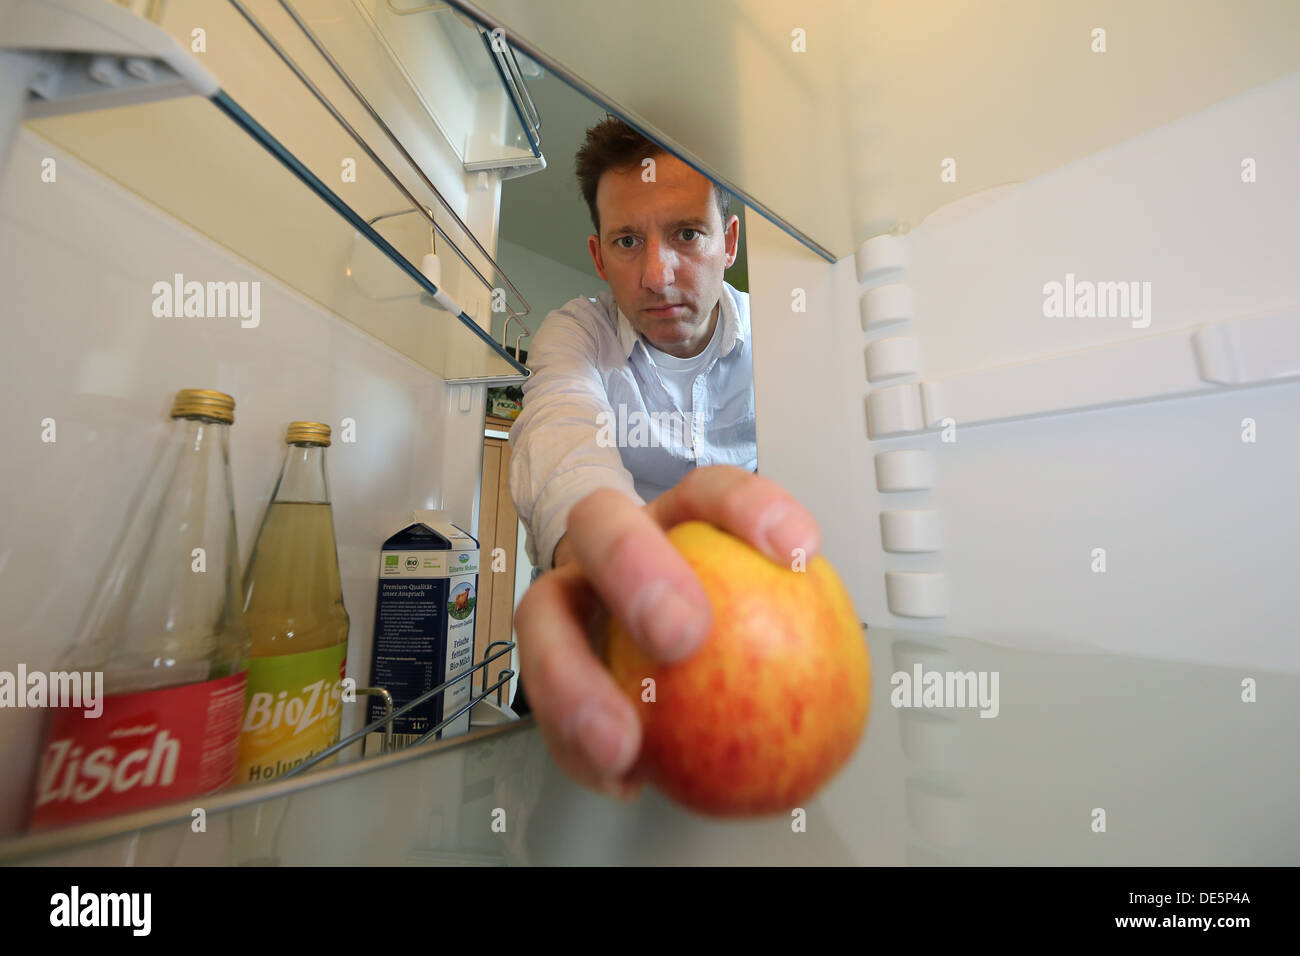 Berlin, Germany, Claus brings an apple from his nearly empty fridge Stock Photo